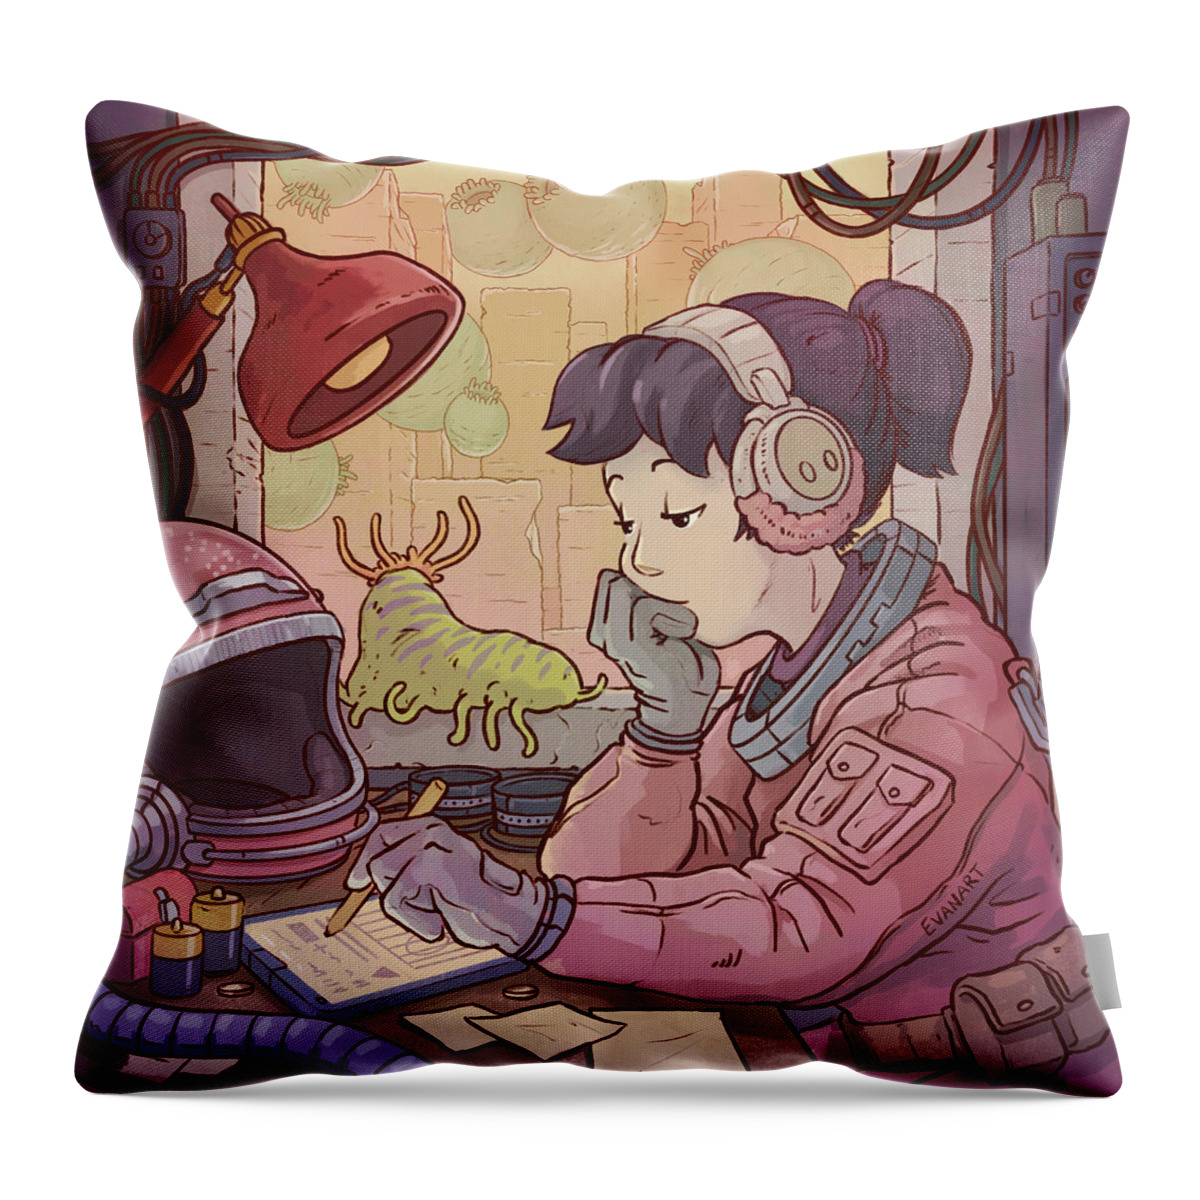  Throw Pillow featuring the digital art Scifi Beats To Relax/study To by EvanArt - Evan Miller